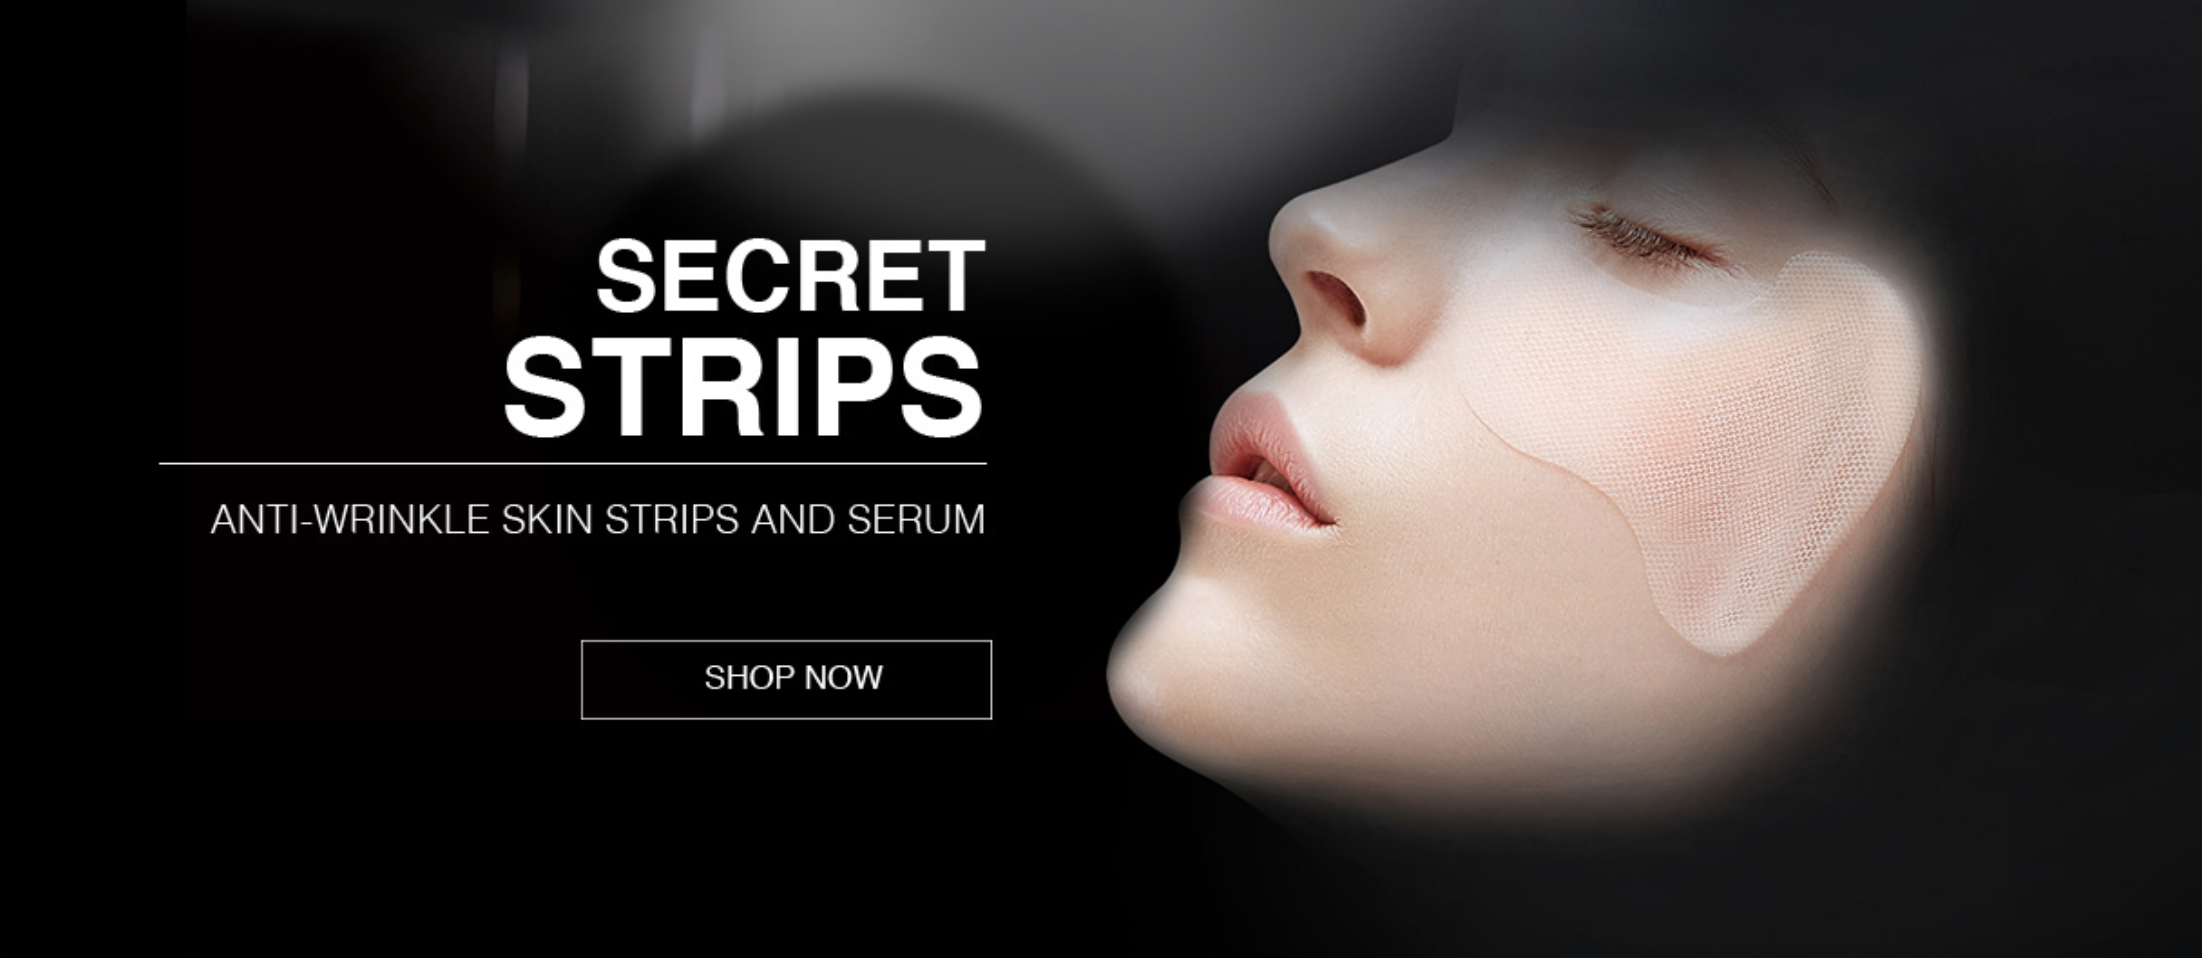 Why Are People so Crazy About Secret Strips Anti-Wrinkle Serum